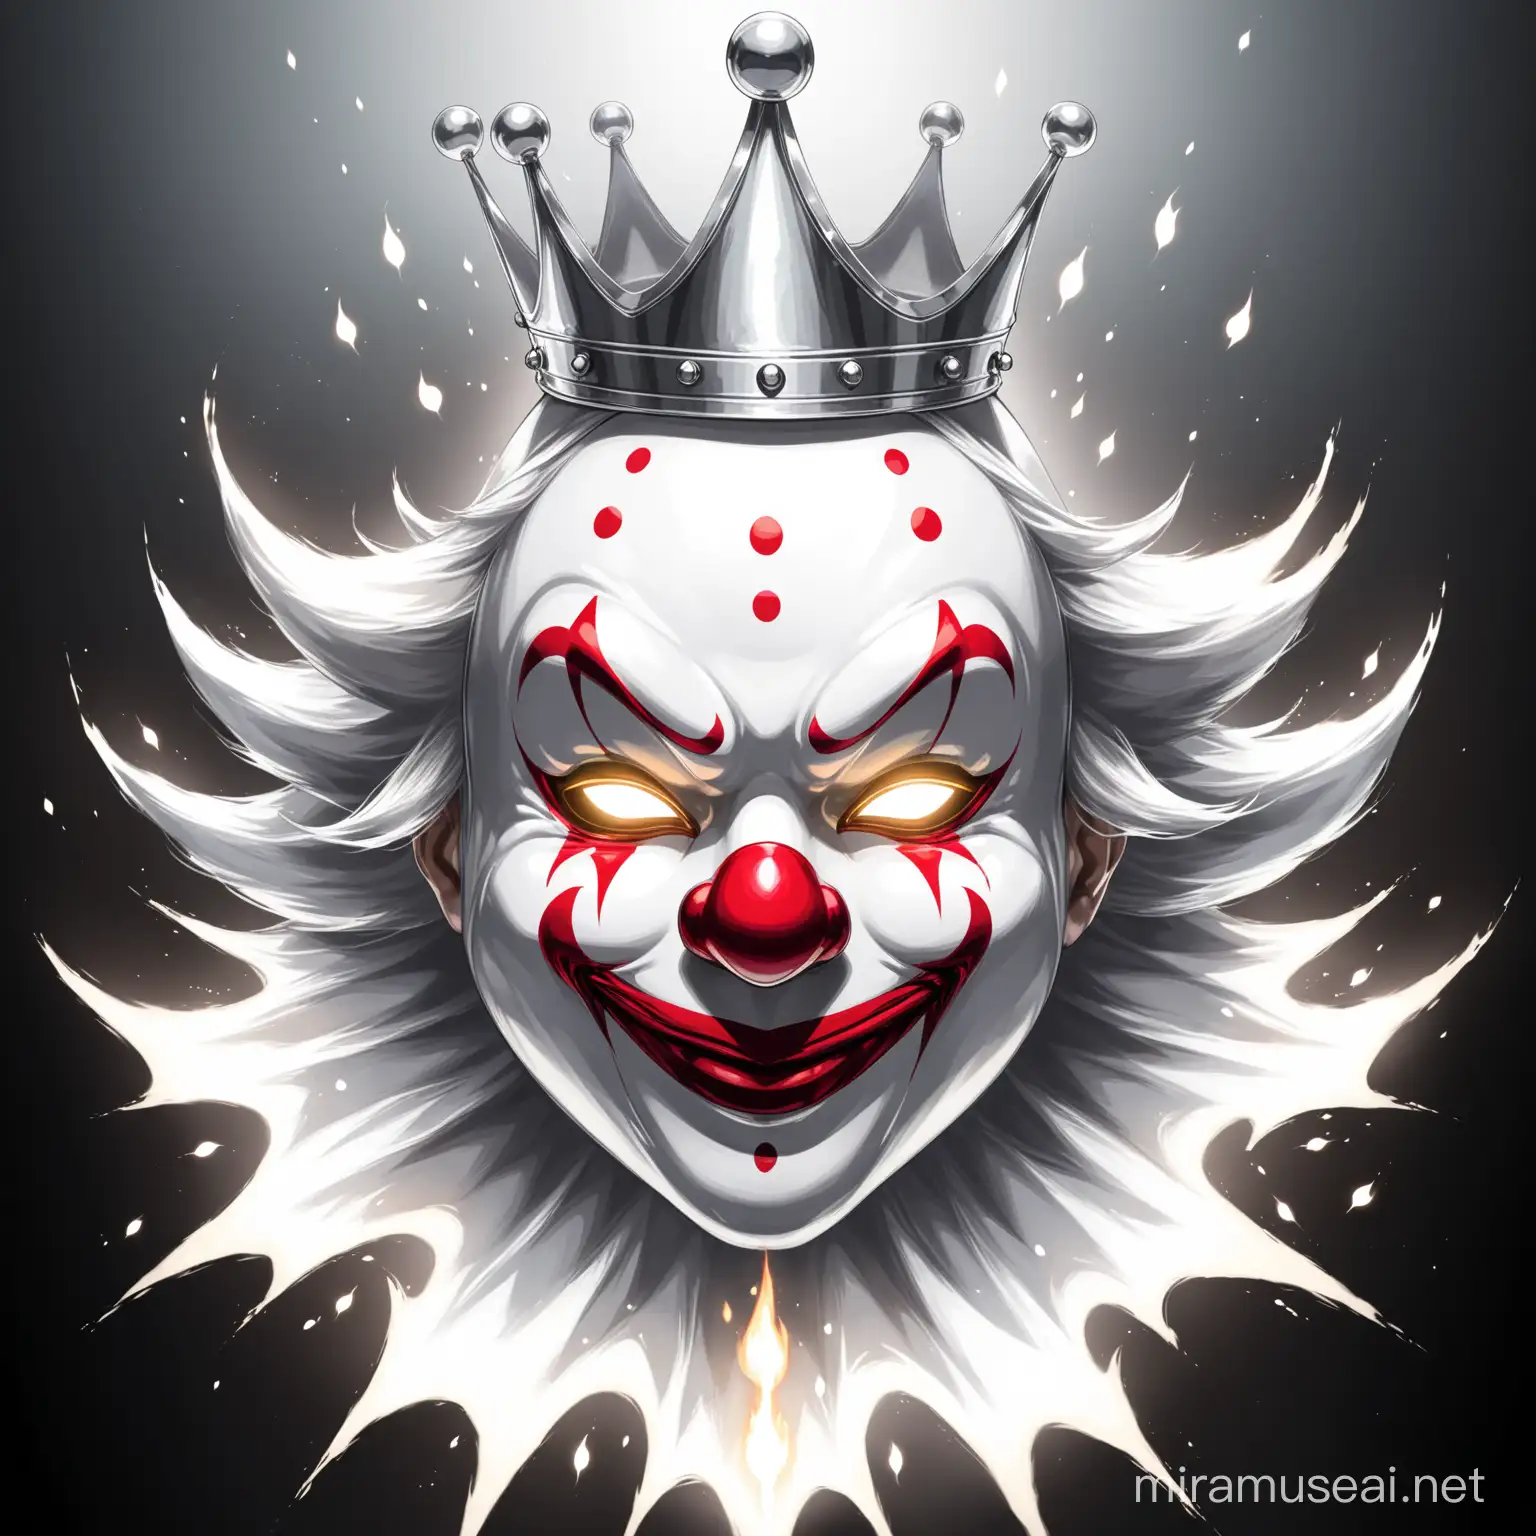 Symmetrical White and Silver Clown Mask with Crown and Ethereal Fire Aura